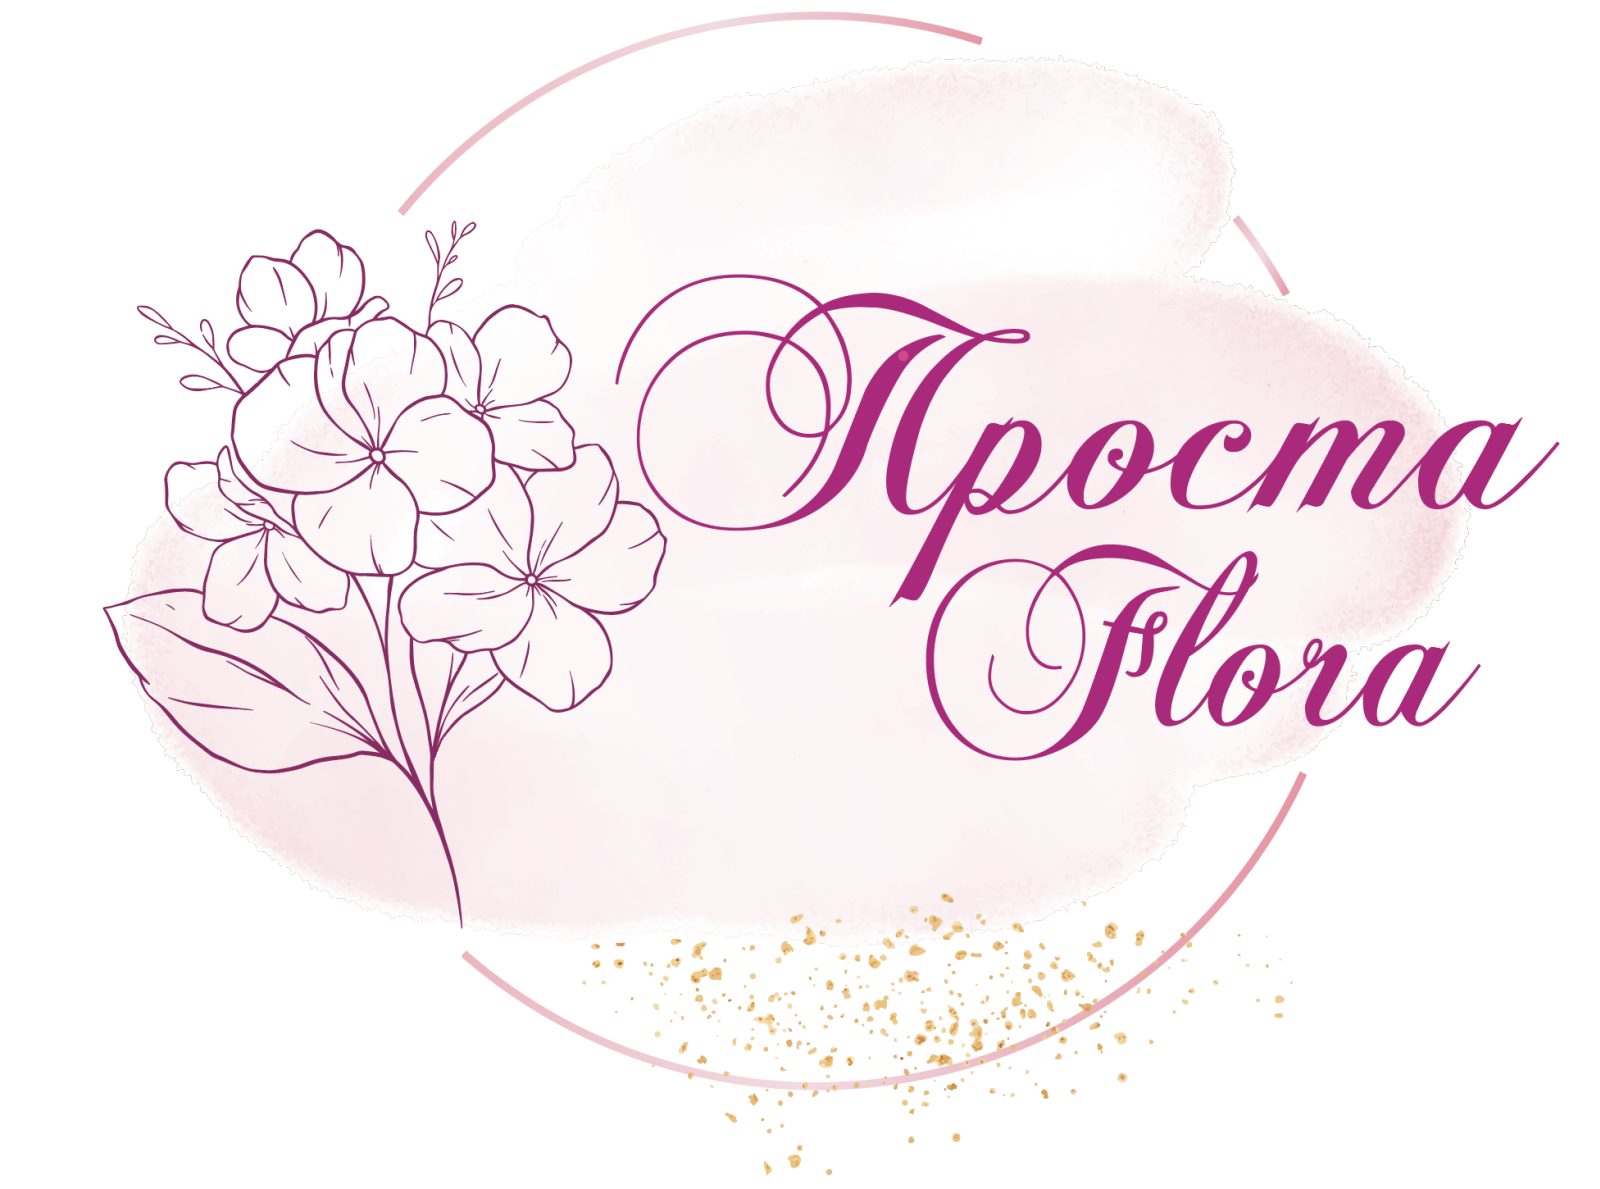 Logo for a flower shop by Olena Muraviova on Dribbble